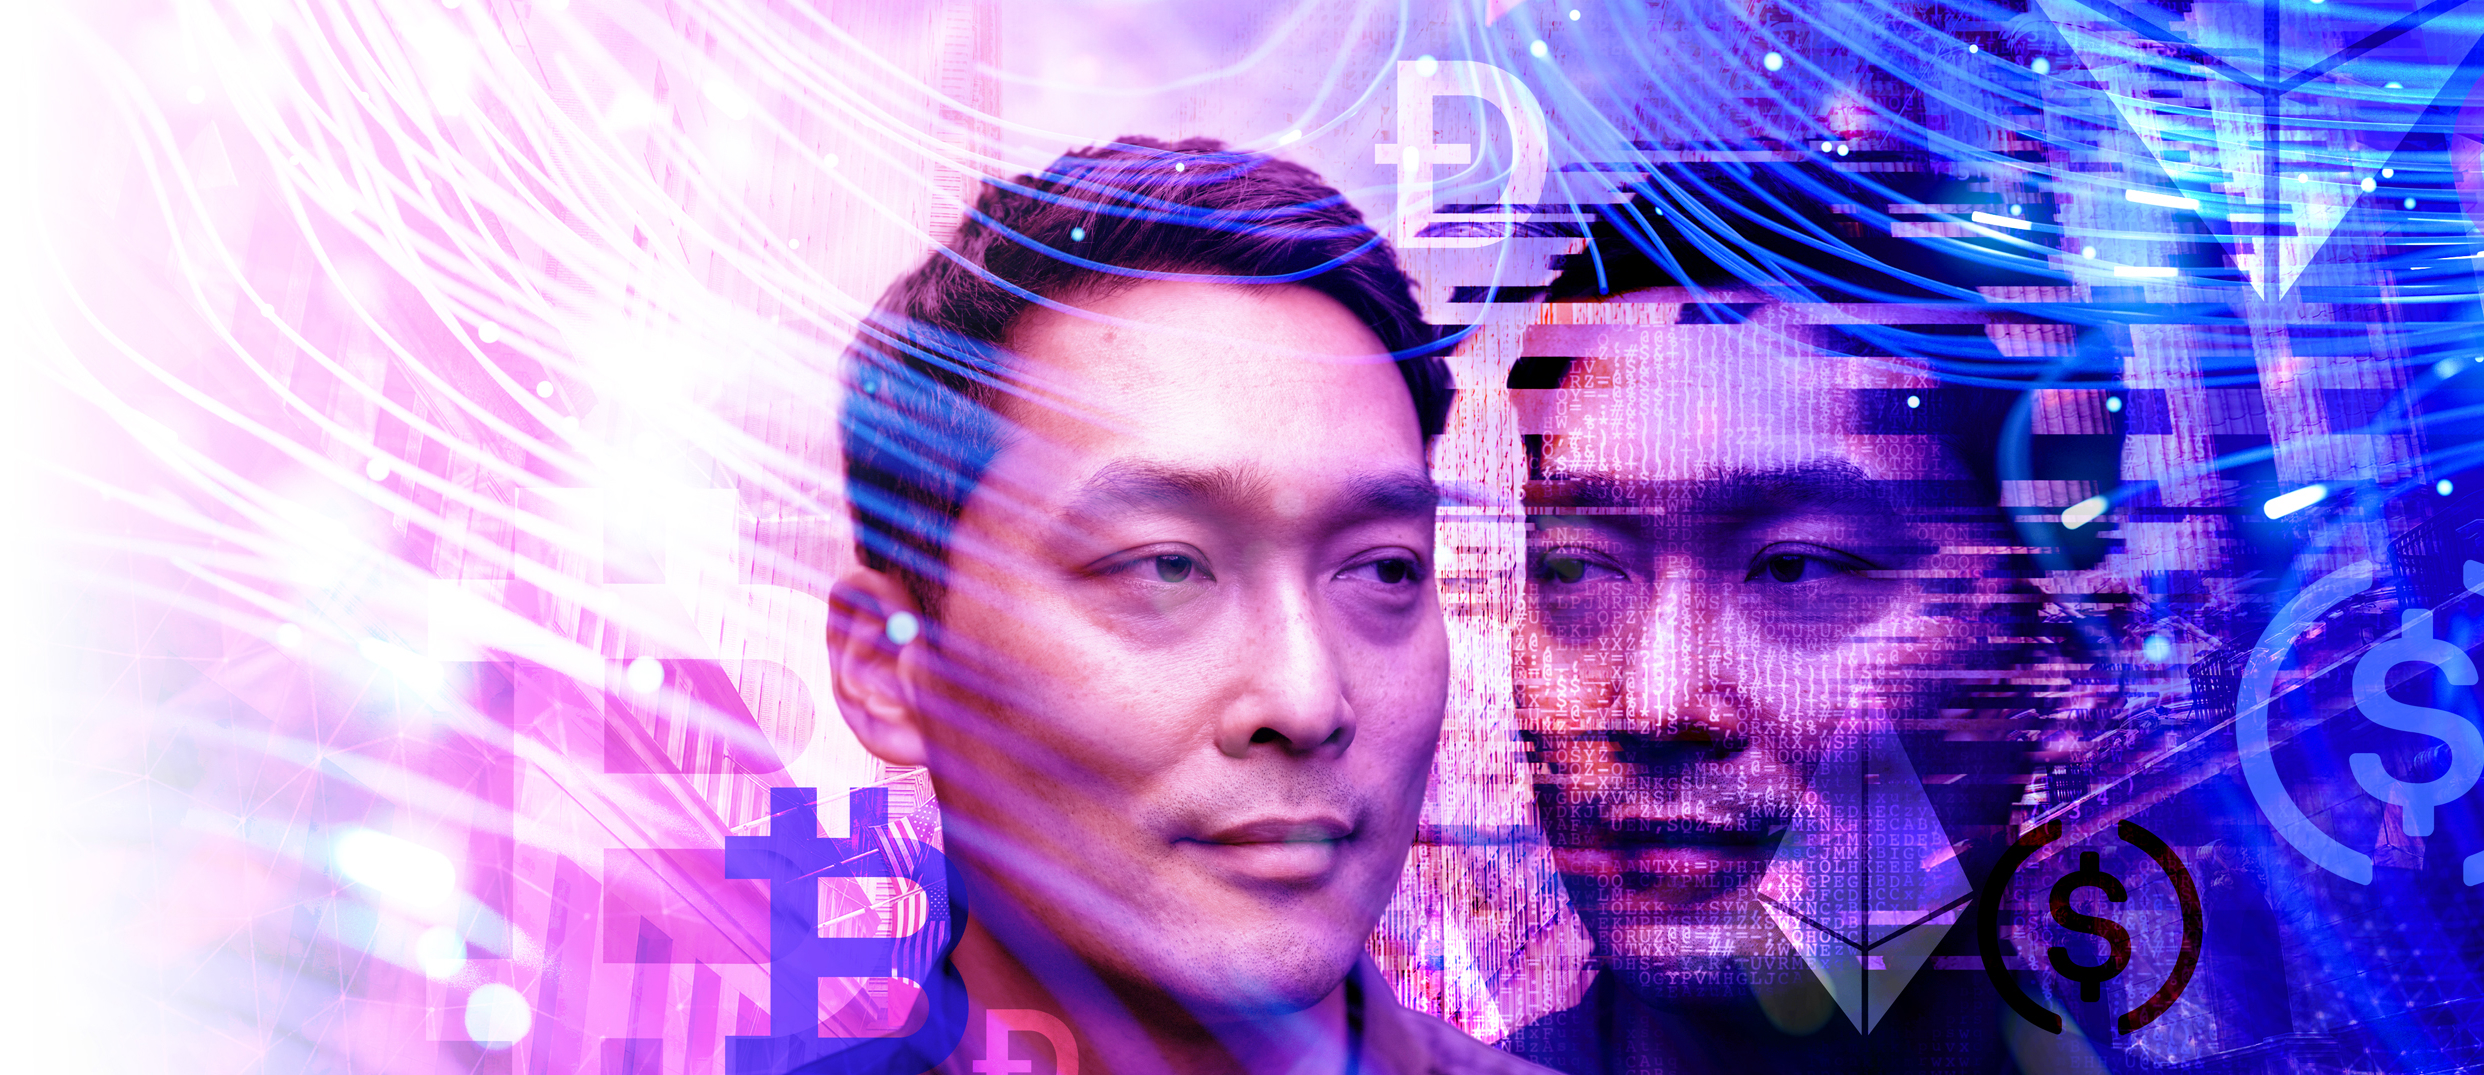 A man's face with its reflection with cryptocurrency icons overlay